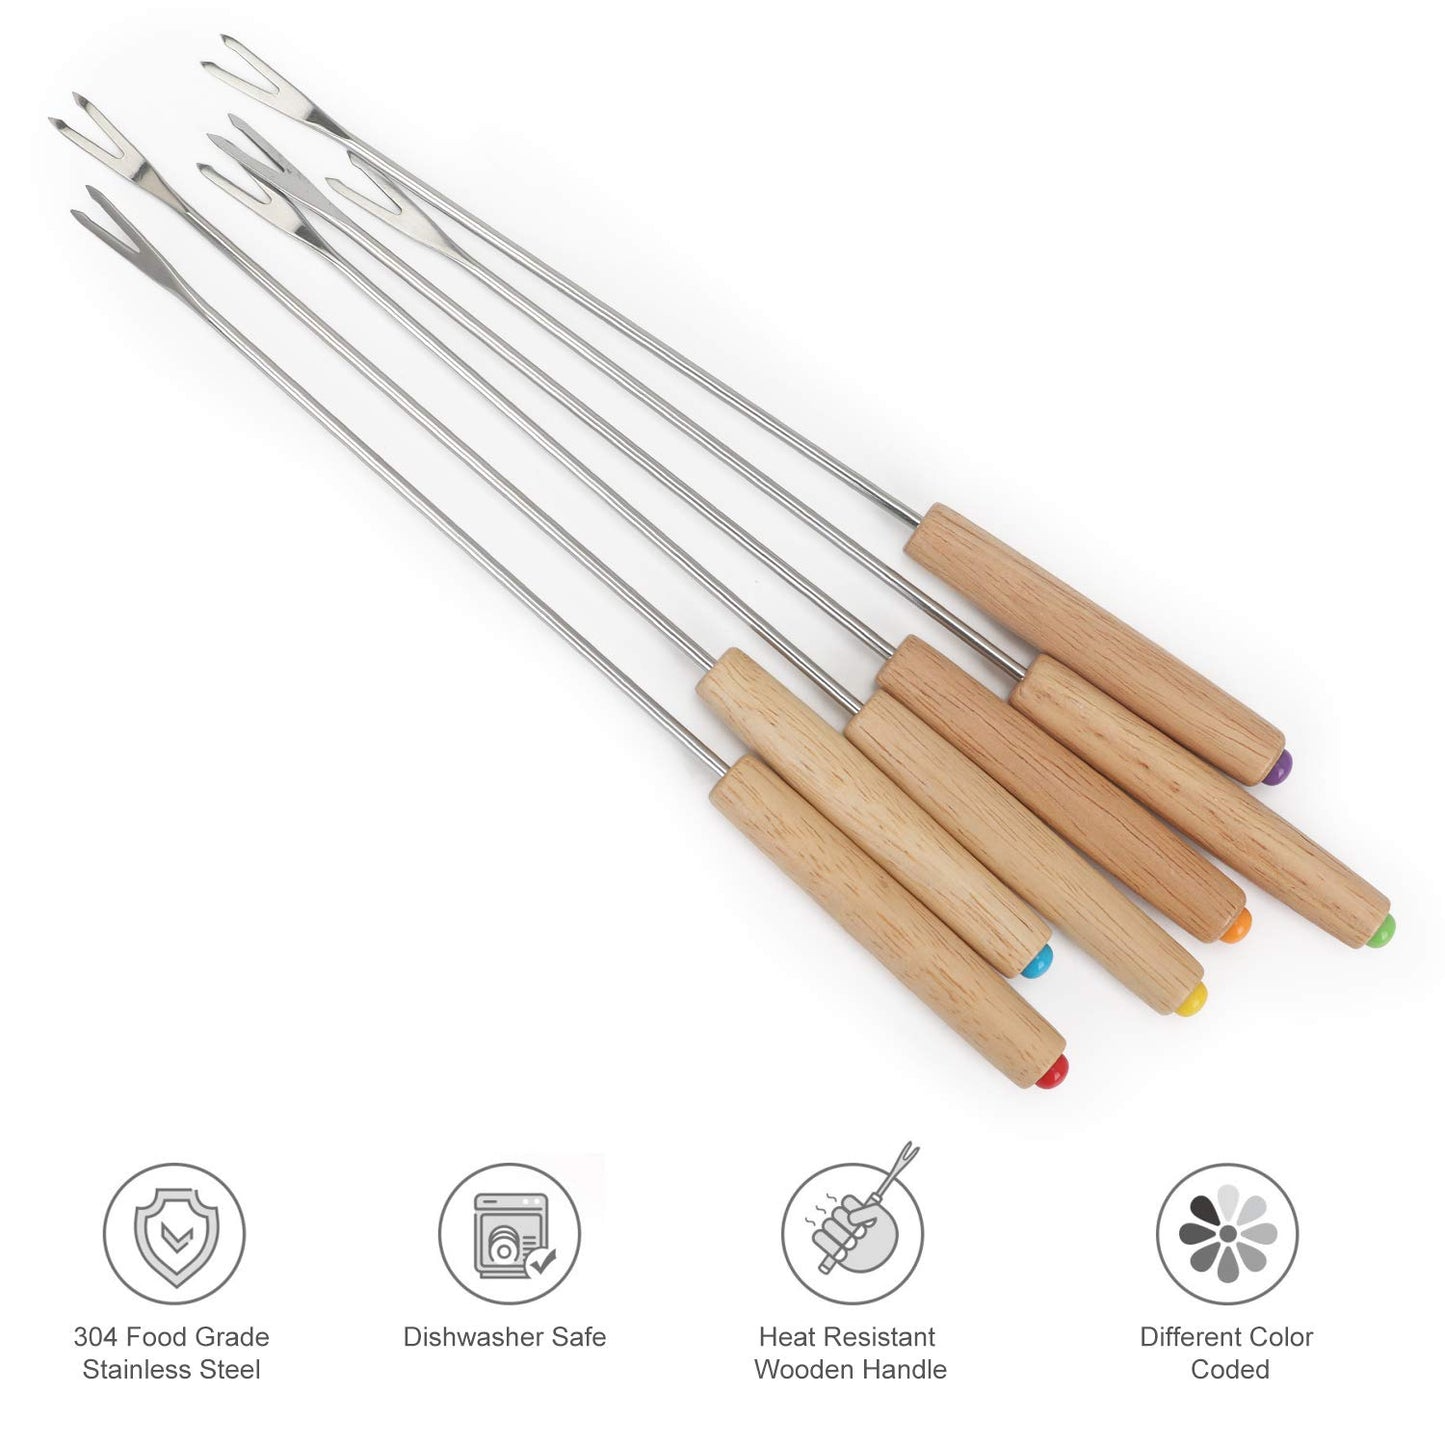 STYDDI Fondue Fork, 18Pcs Stainless Steel Color Coding Fondue Forks with Wooden Handle for Chocolate Fountain Cheese Fondue Roast Marshmallows, 9.5 Inch